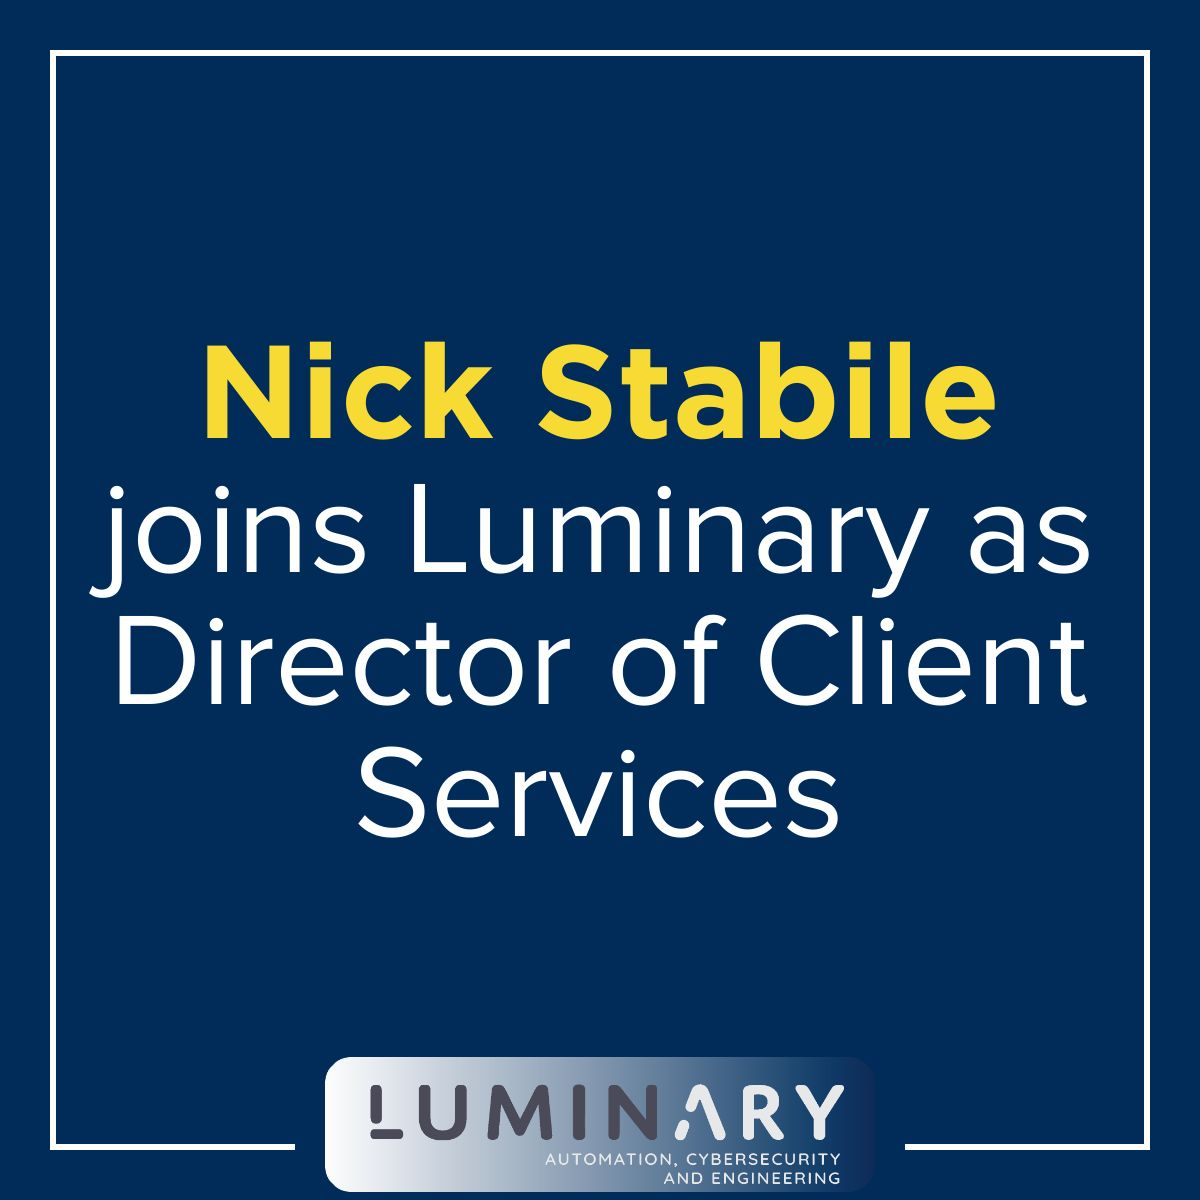 Luminary Automation, Cybersecurity and Engineering Hires New Director Of Client Services